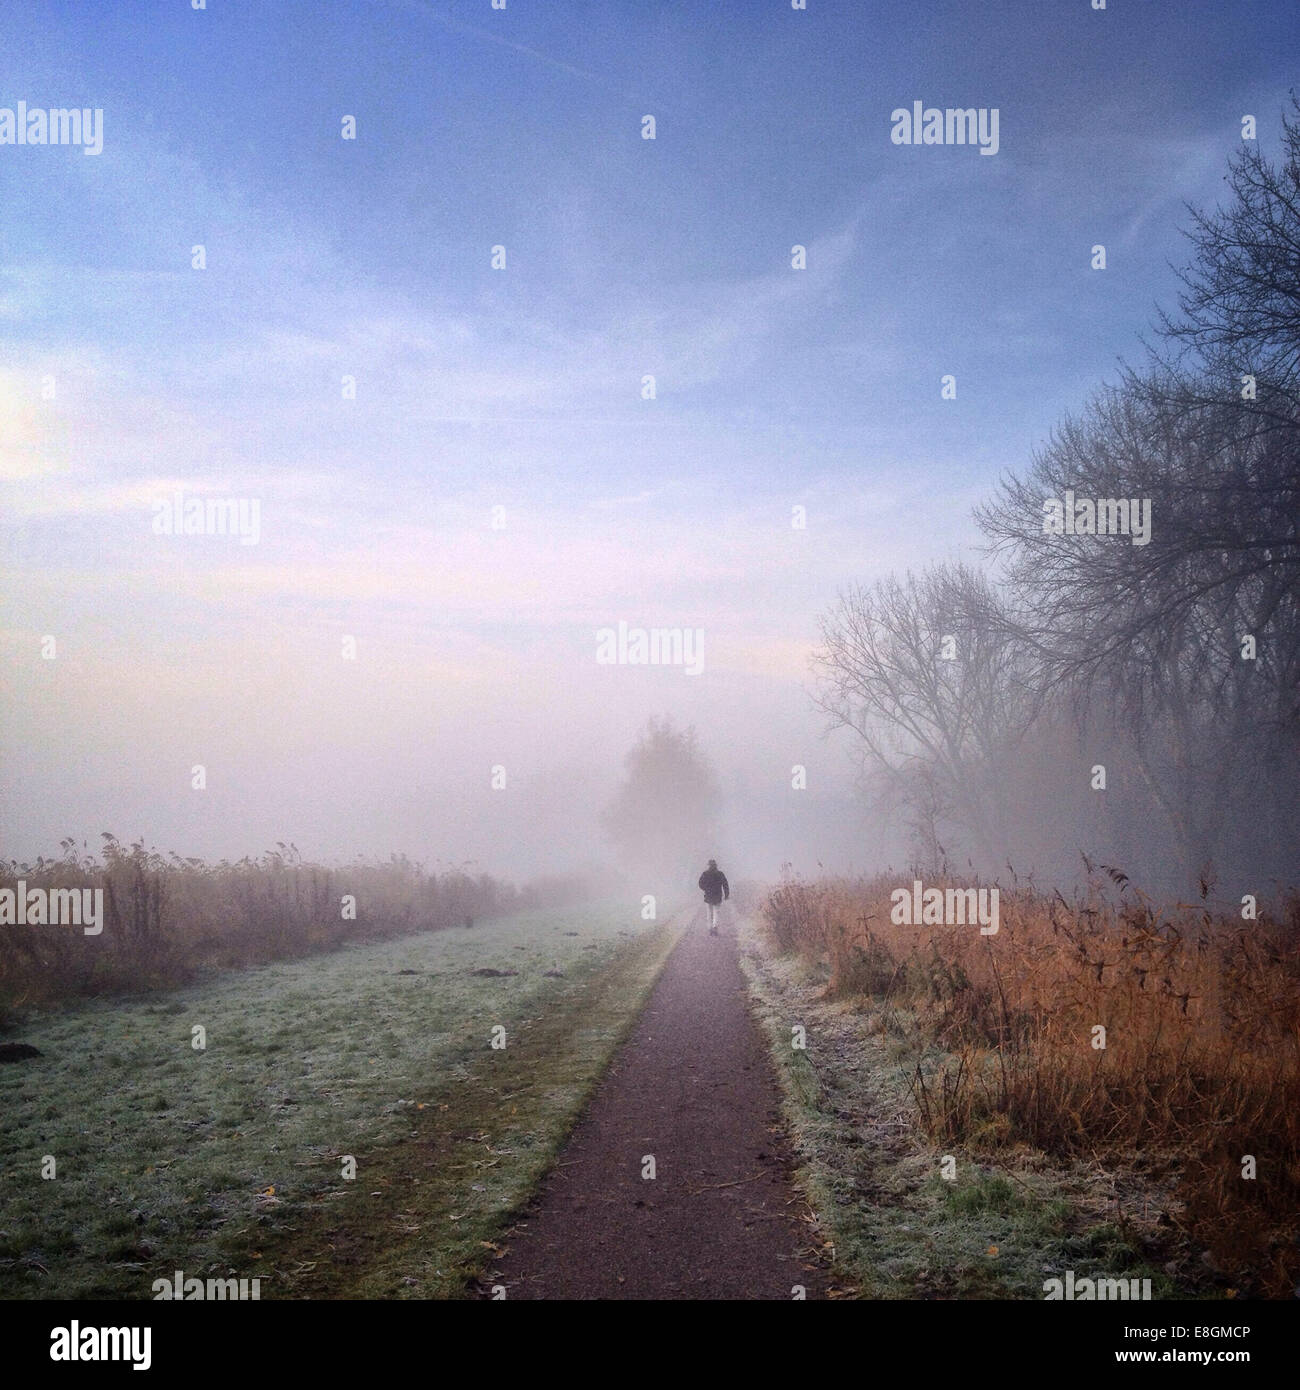 Rear view of a Man walking down path on misty morning Stock Photo